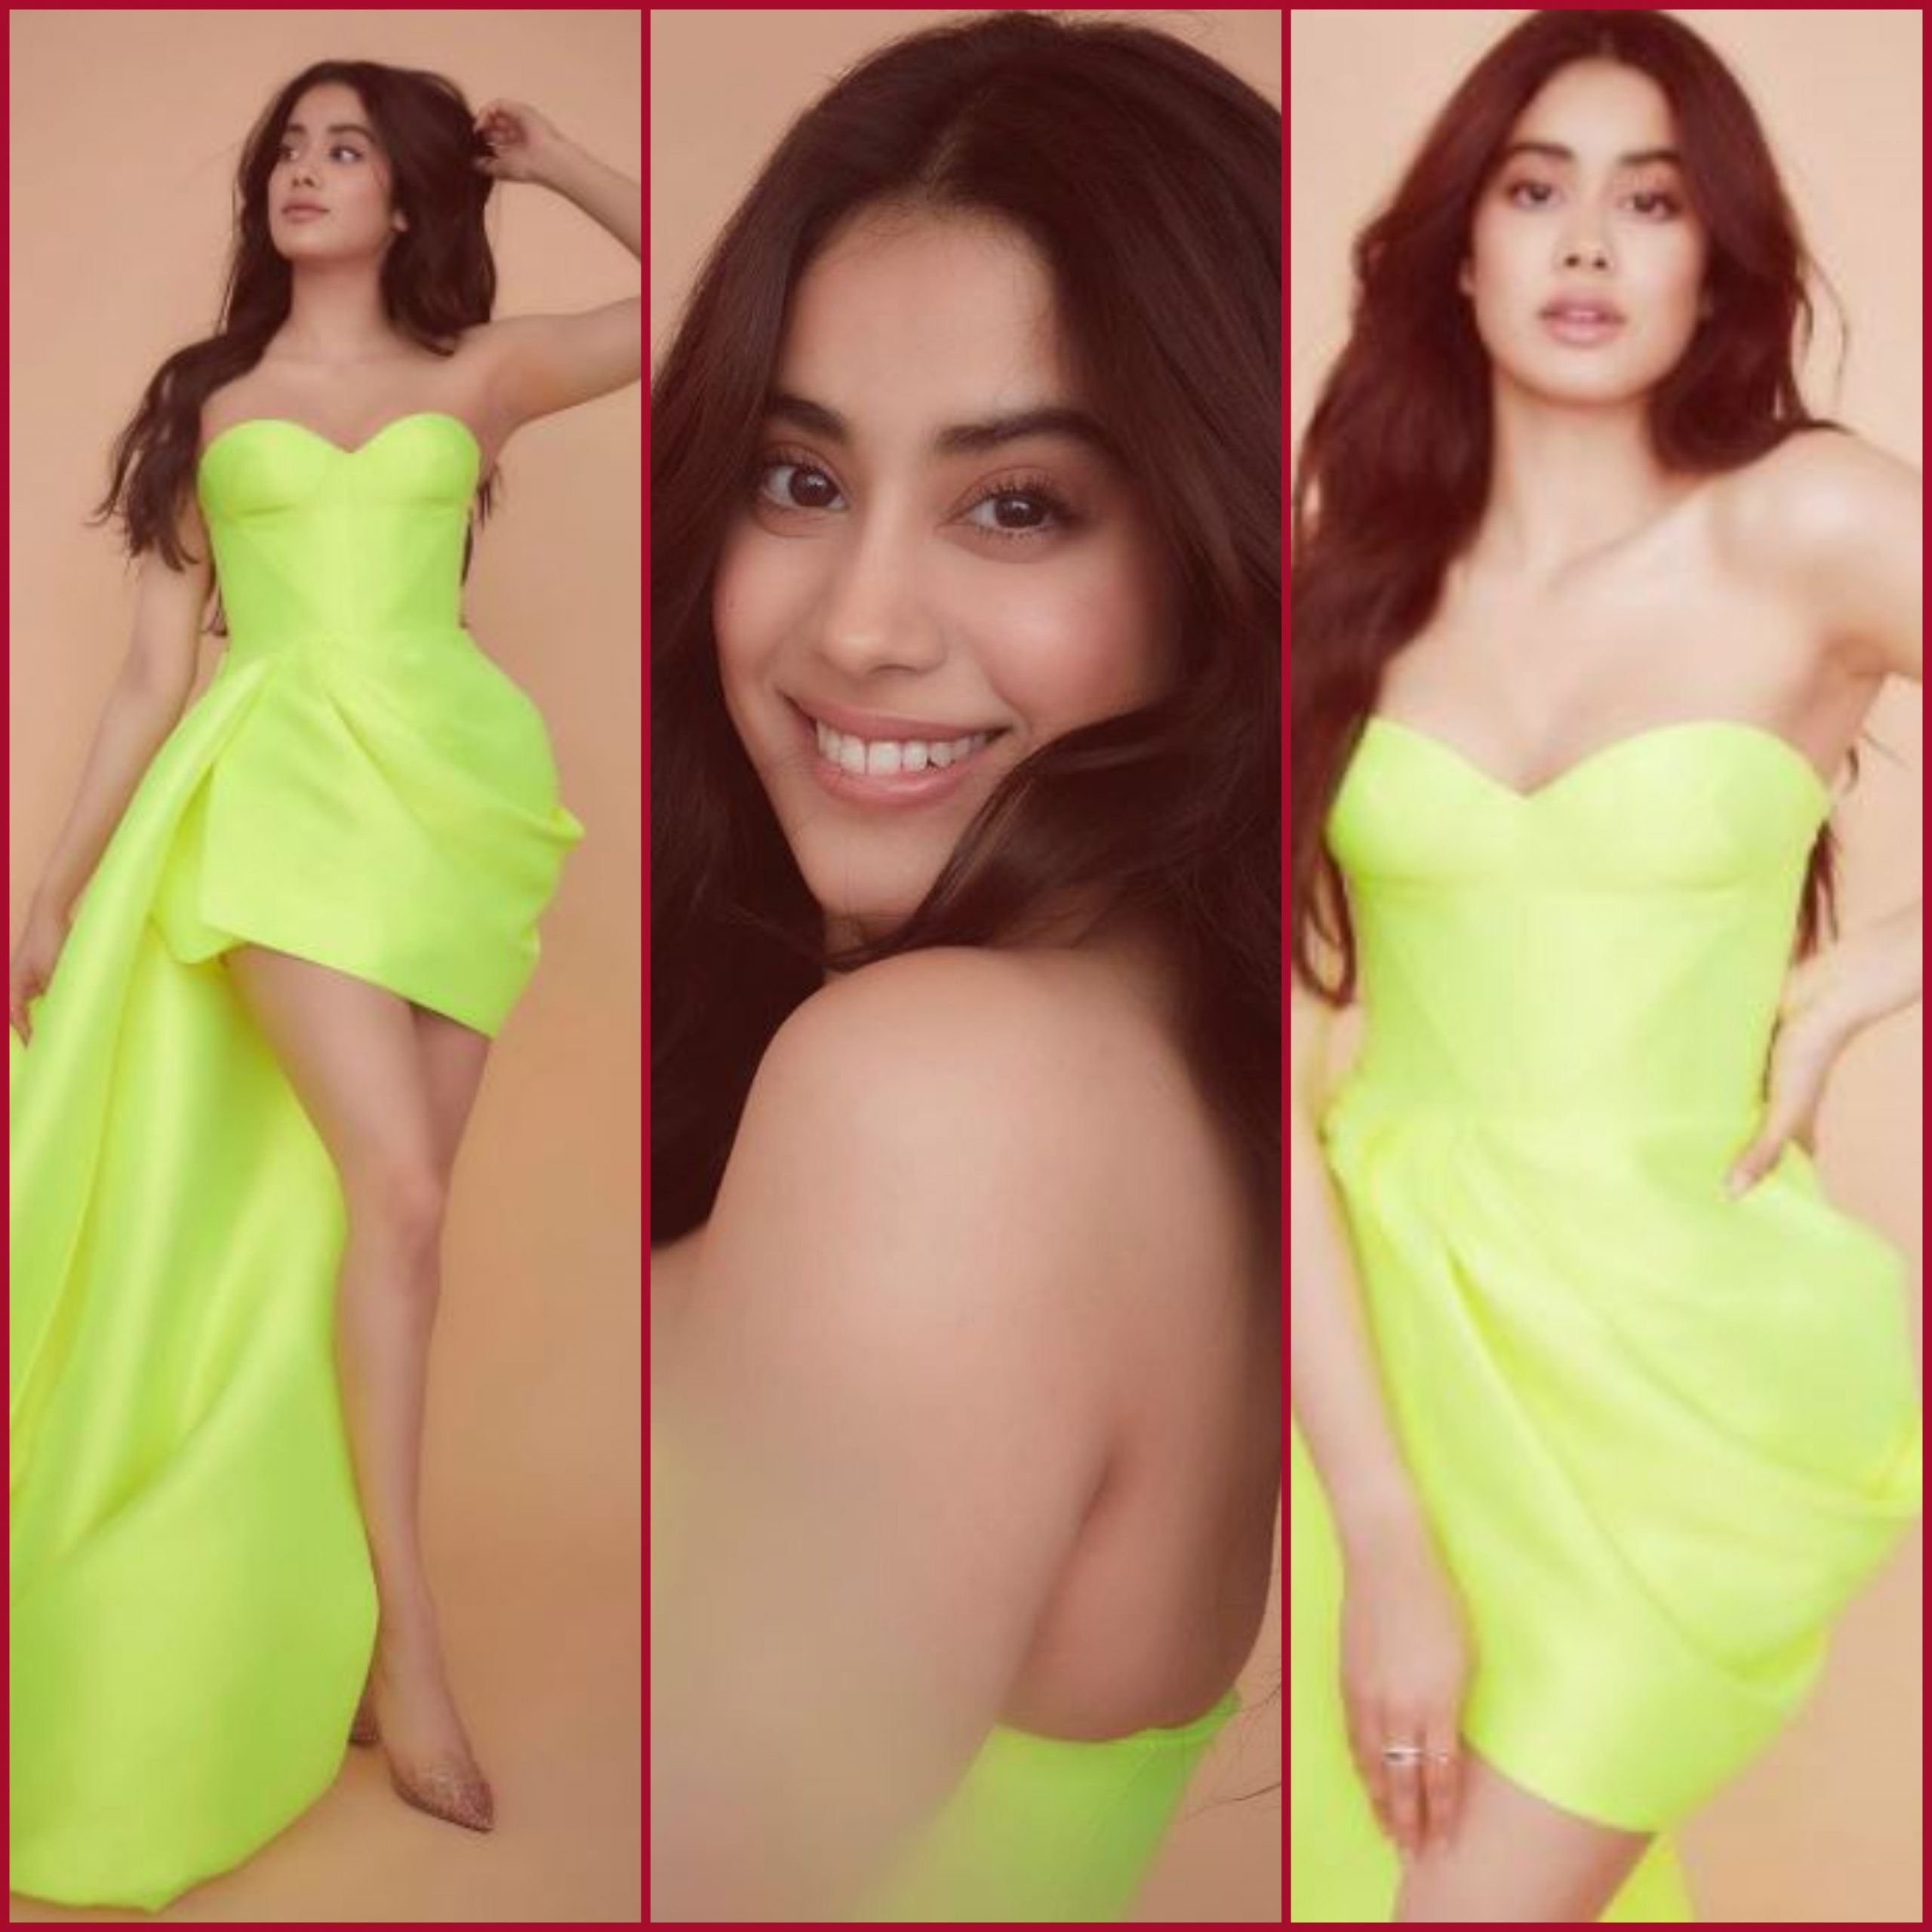 Jhanvi Kapoor looks sexy in neon green outfit